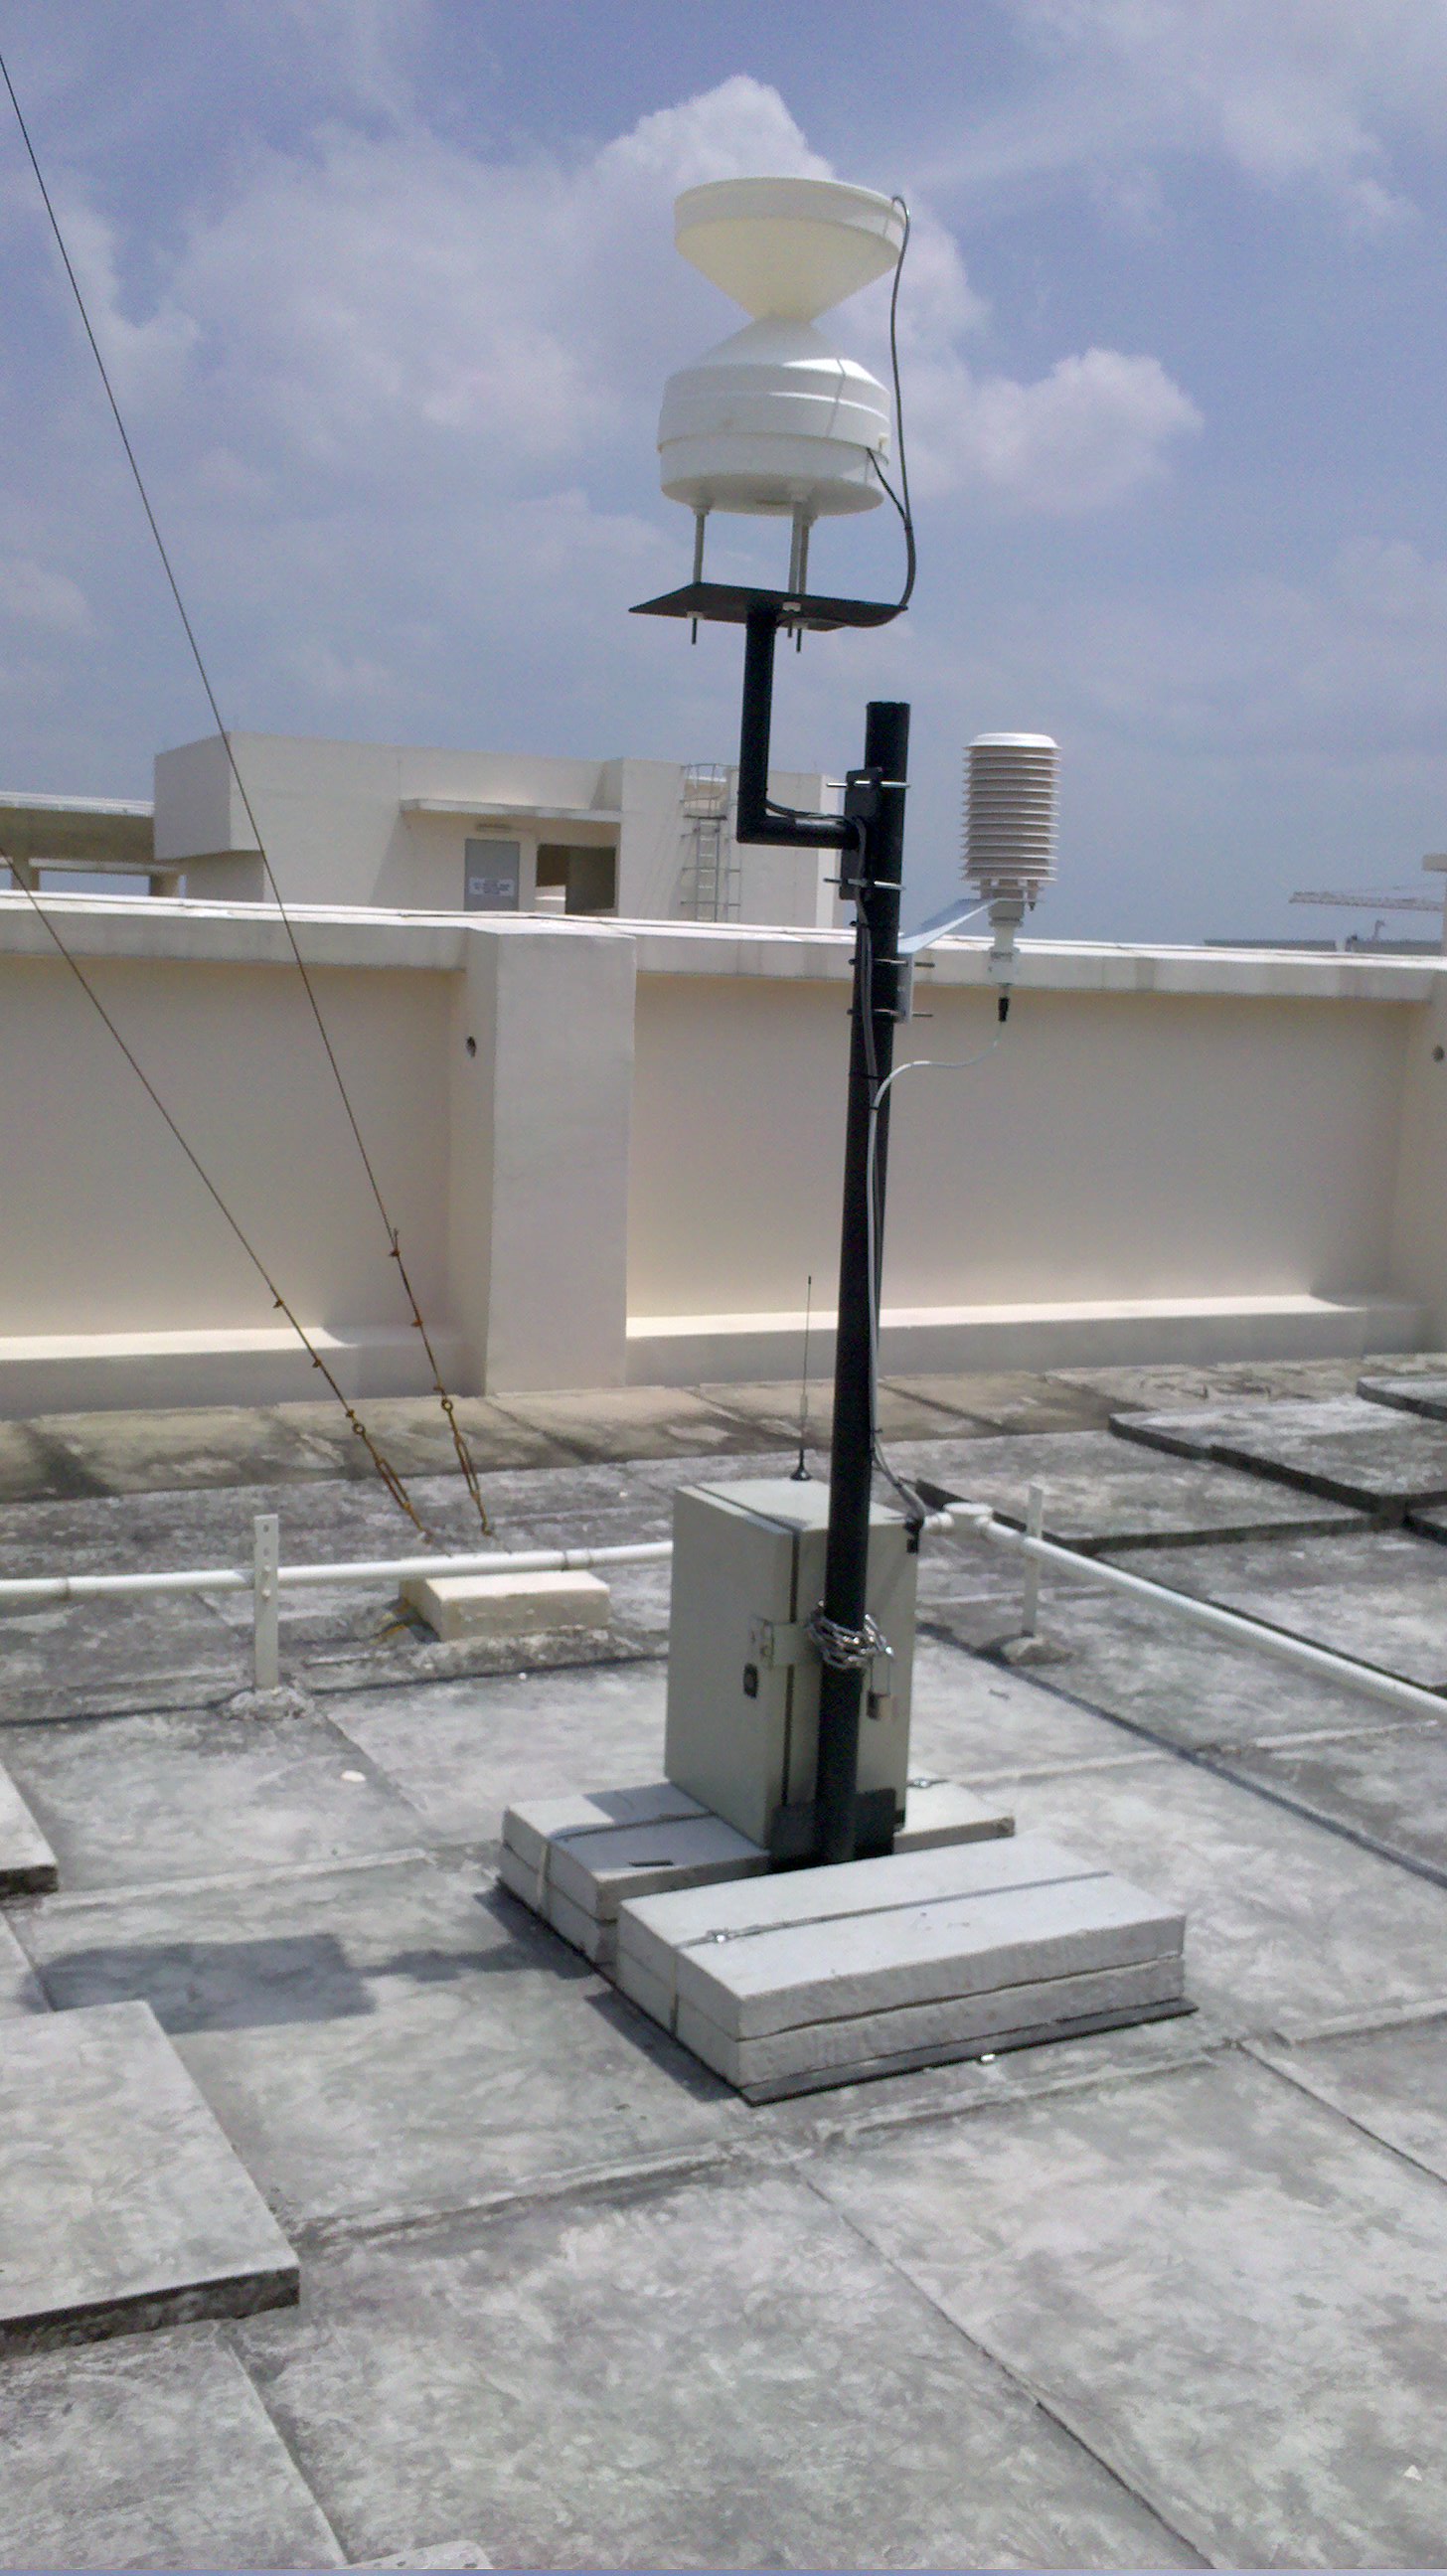 Rooftop weather station